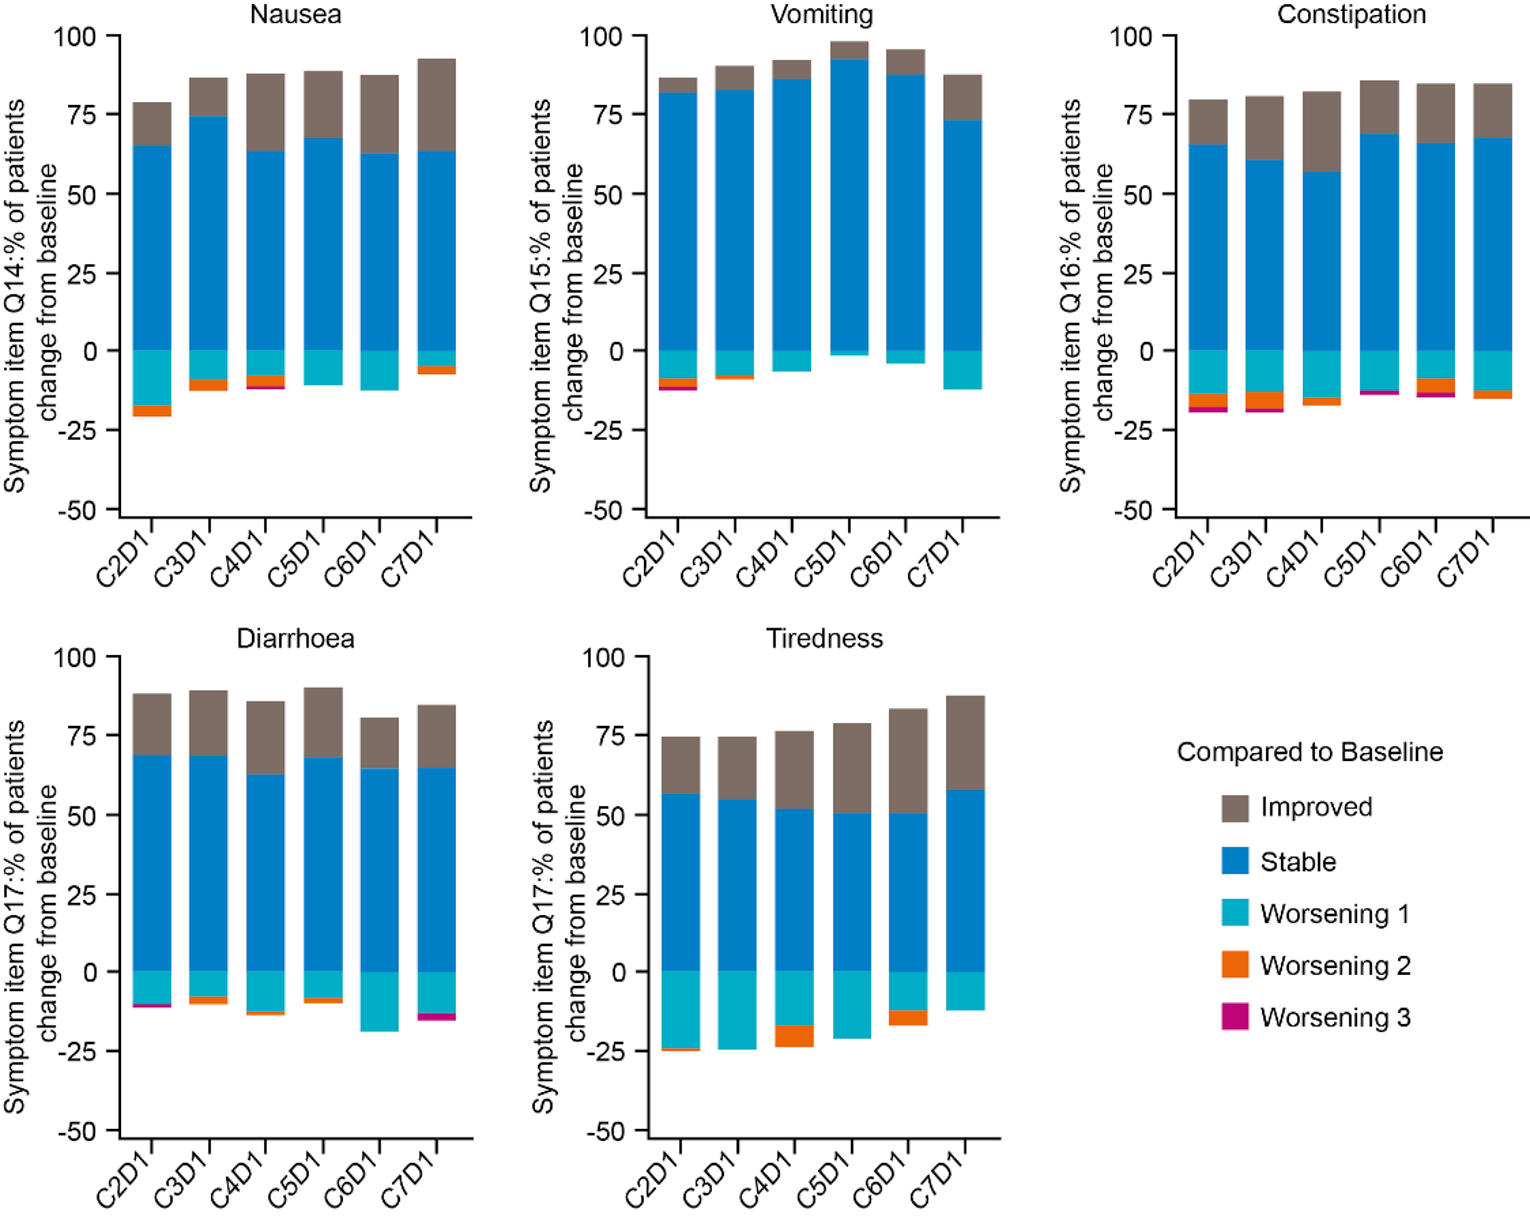 Five graphs showing the mean change in response for symptomatic AEs (i.e., nausea, vomiting, constipation, diarrhea, and tiredness) from cycle 2 to cycle 7 at IA-2 in the safety analysis dataset.